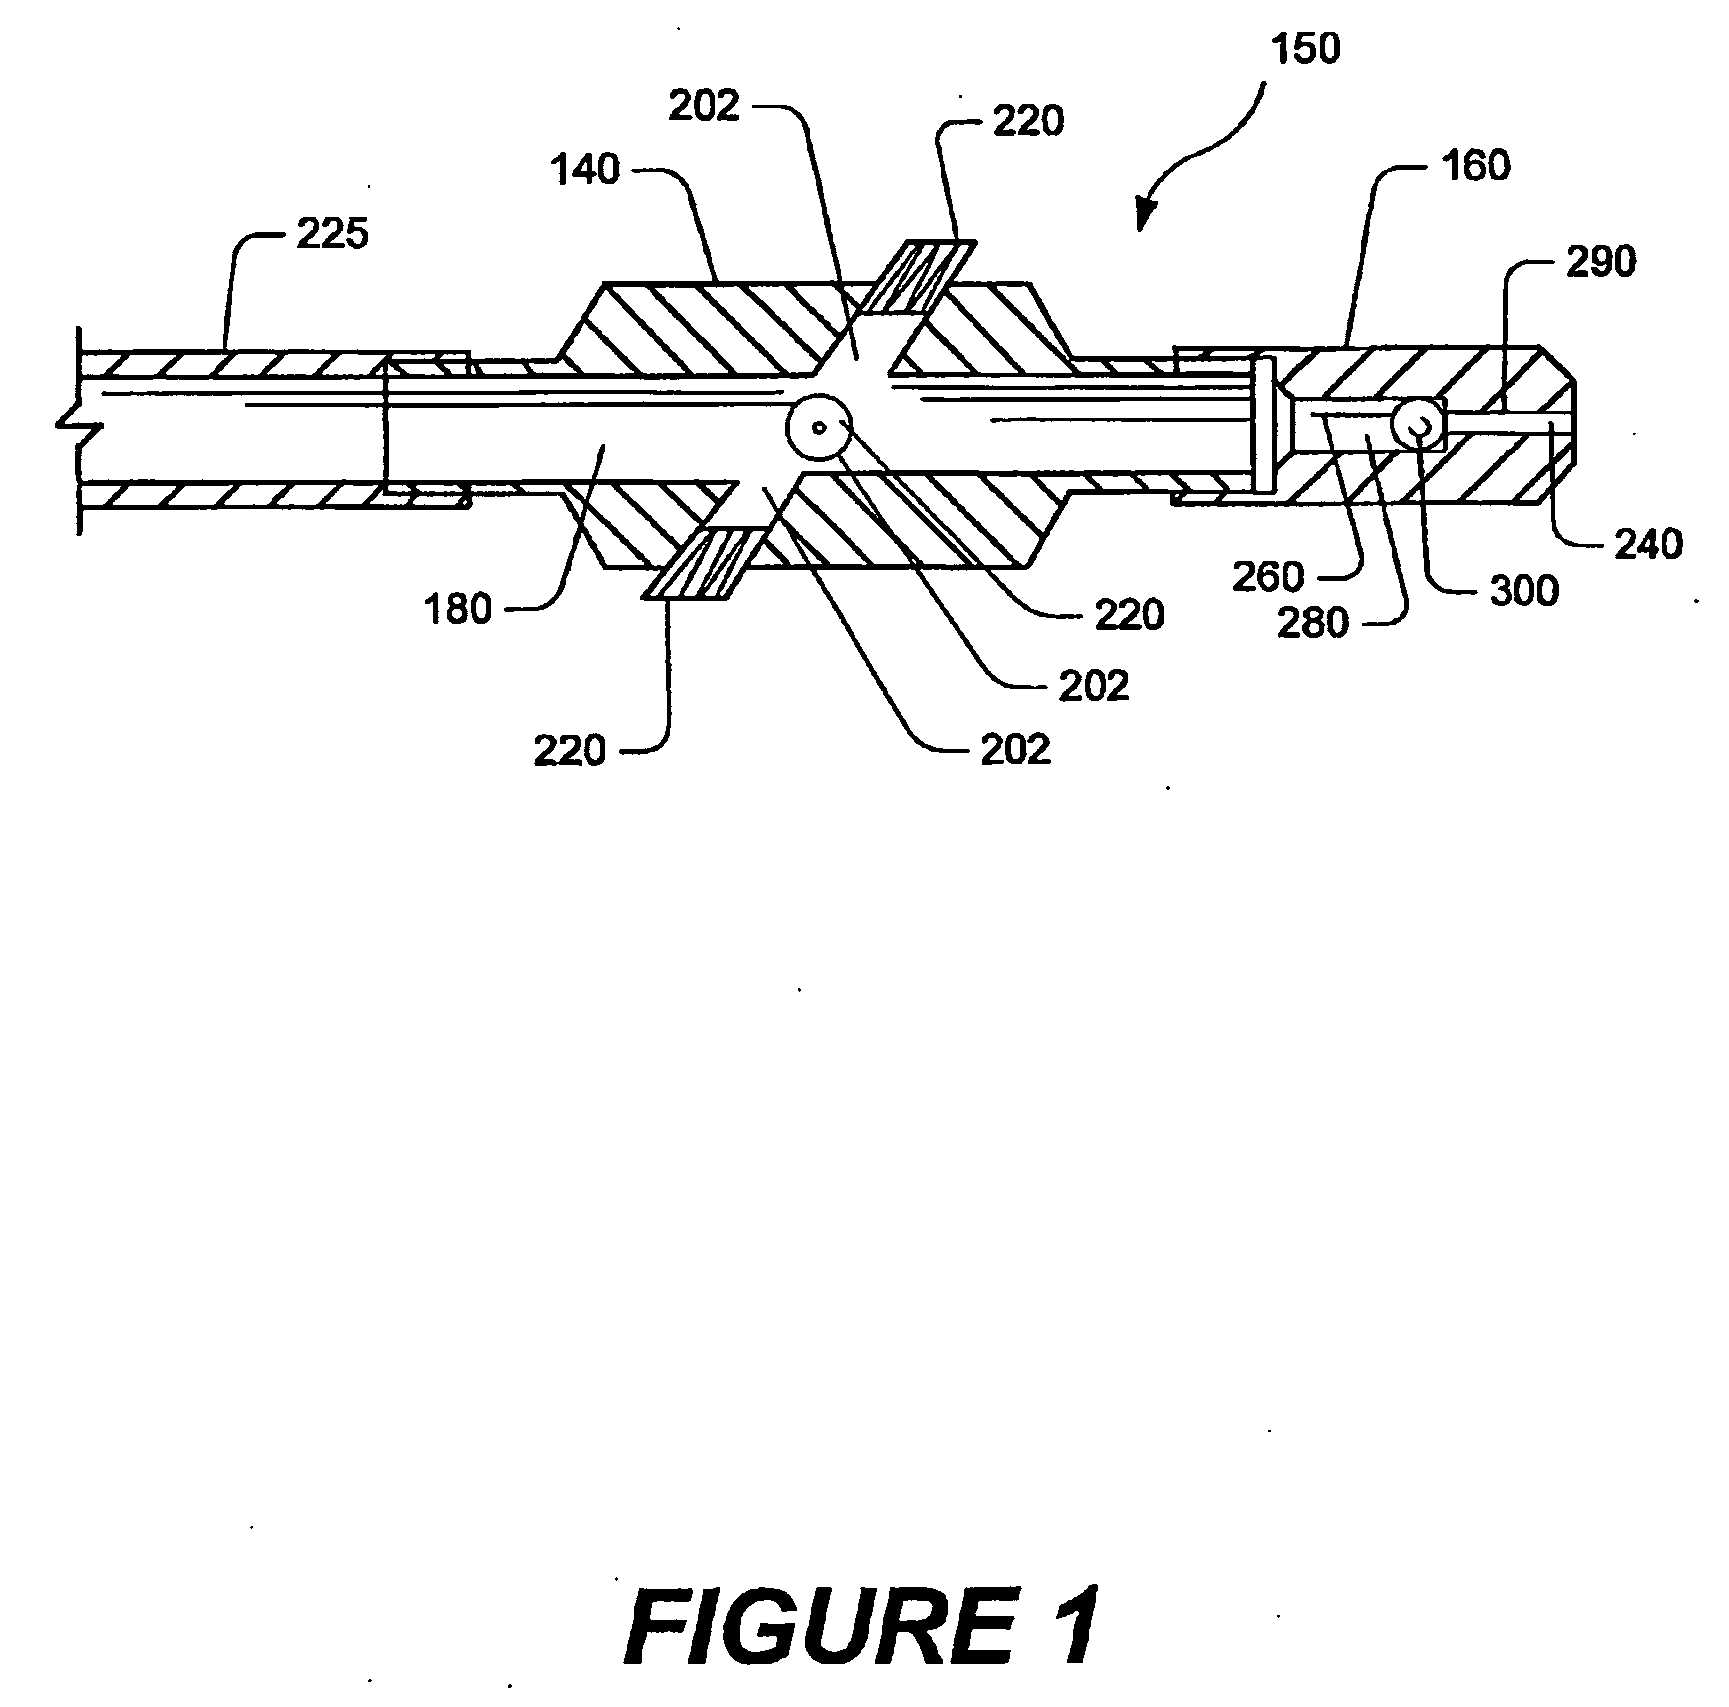 Methods of treating subterranean formations using low-temperature fluids